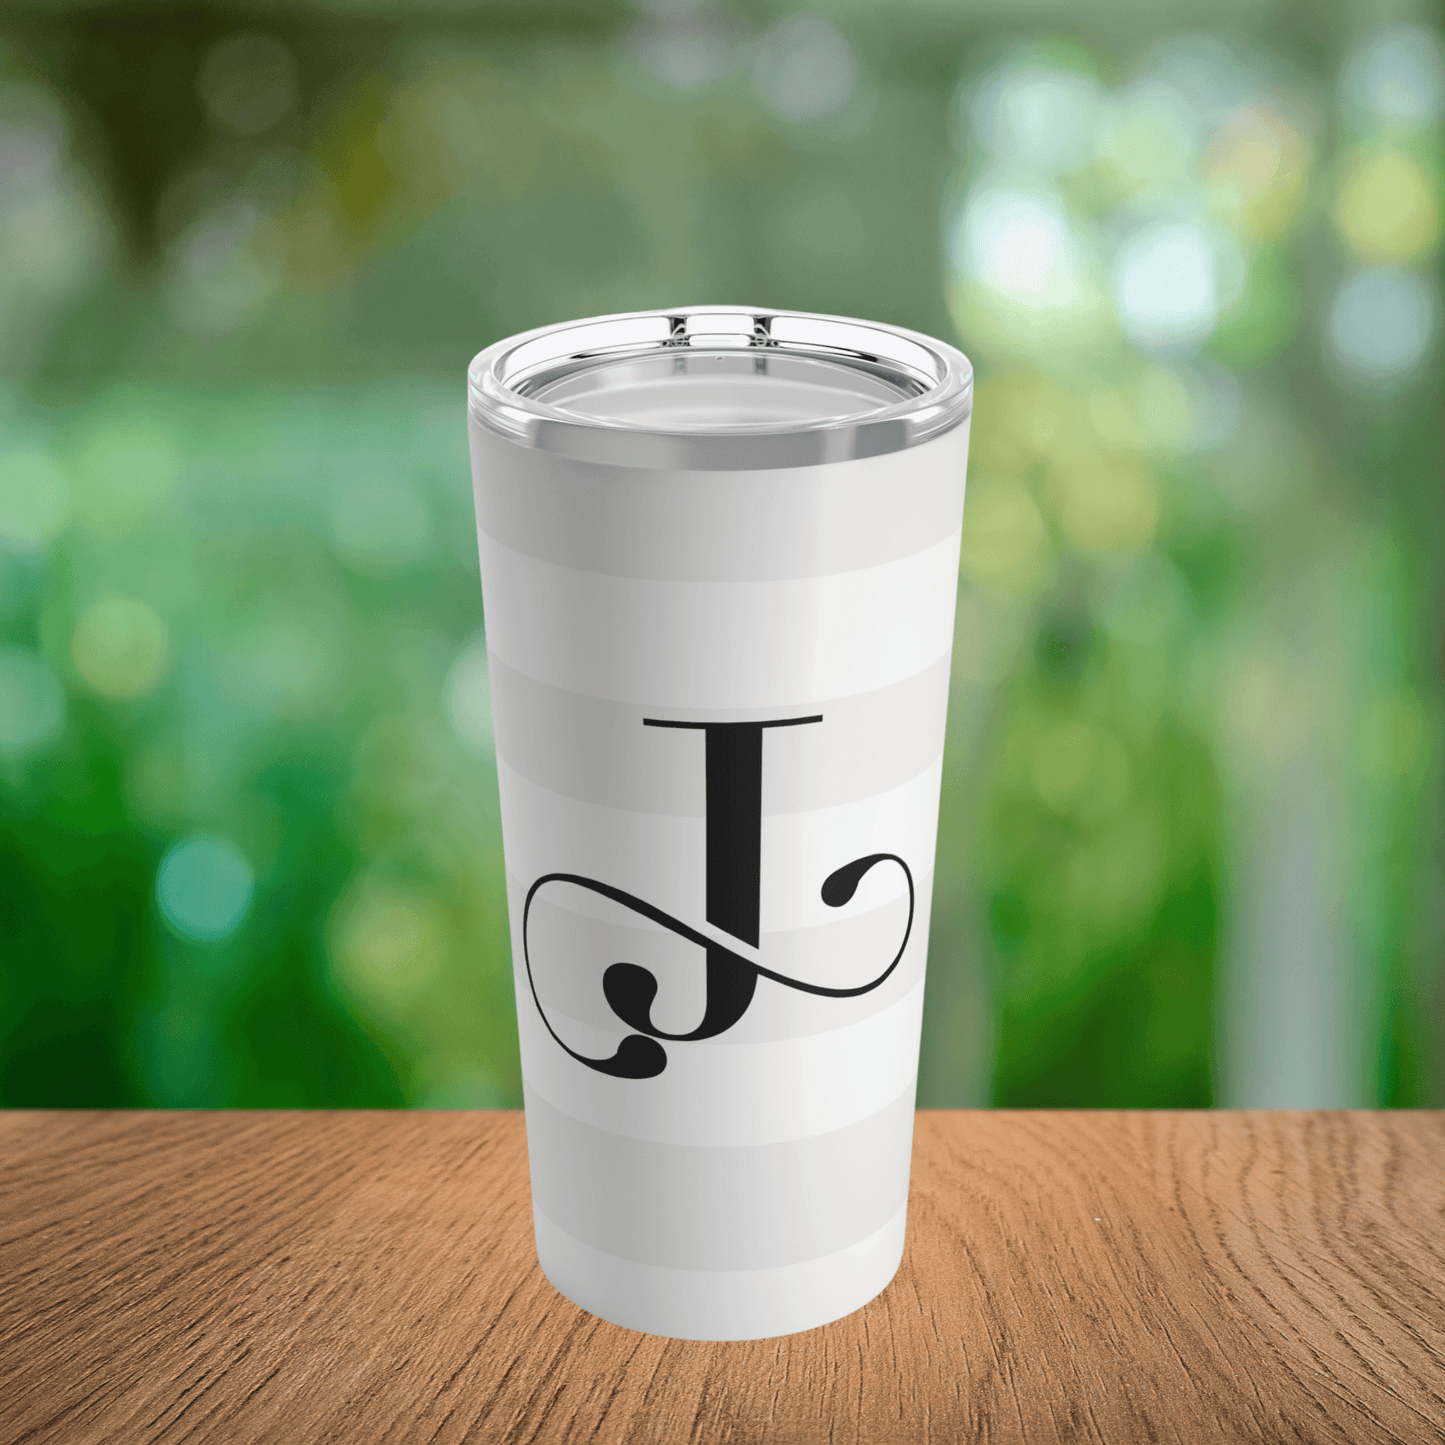 20 oz Insulated Tumbler, Elegant Monogrammed Gift for Bridesmaids, Stainless Steel Coffee Mug Travel Cup